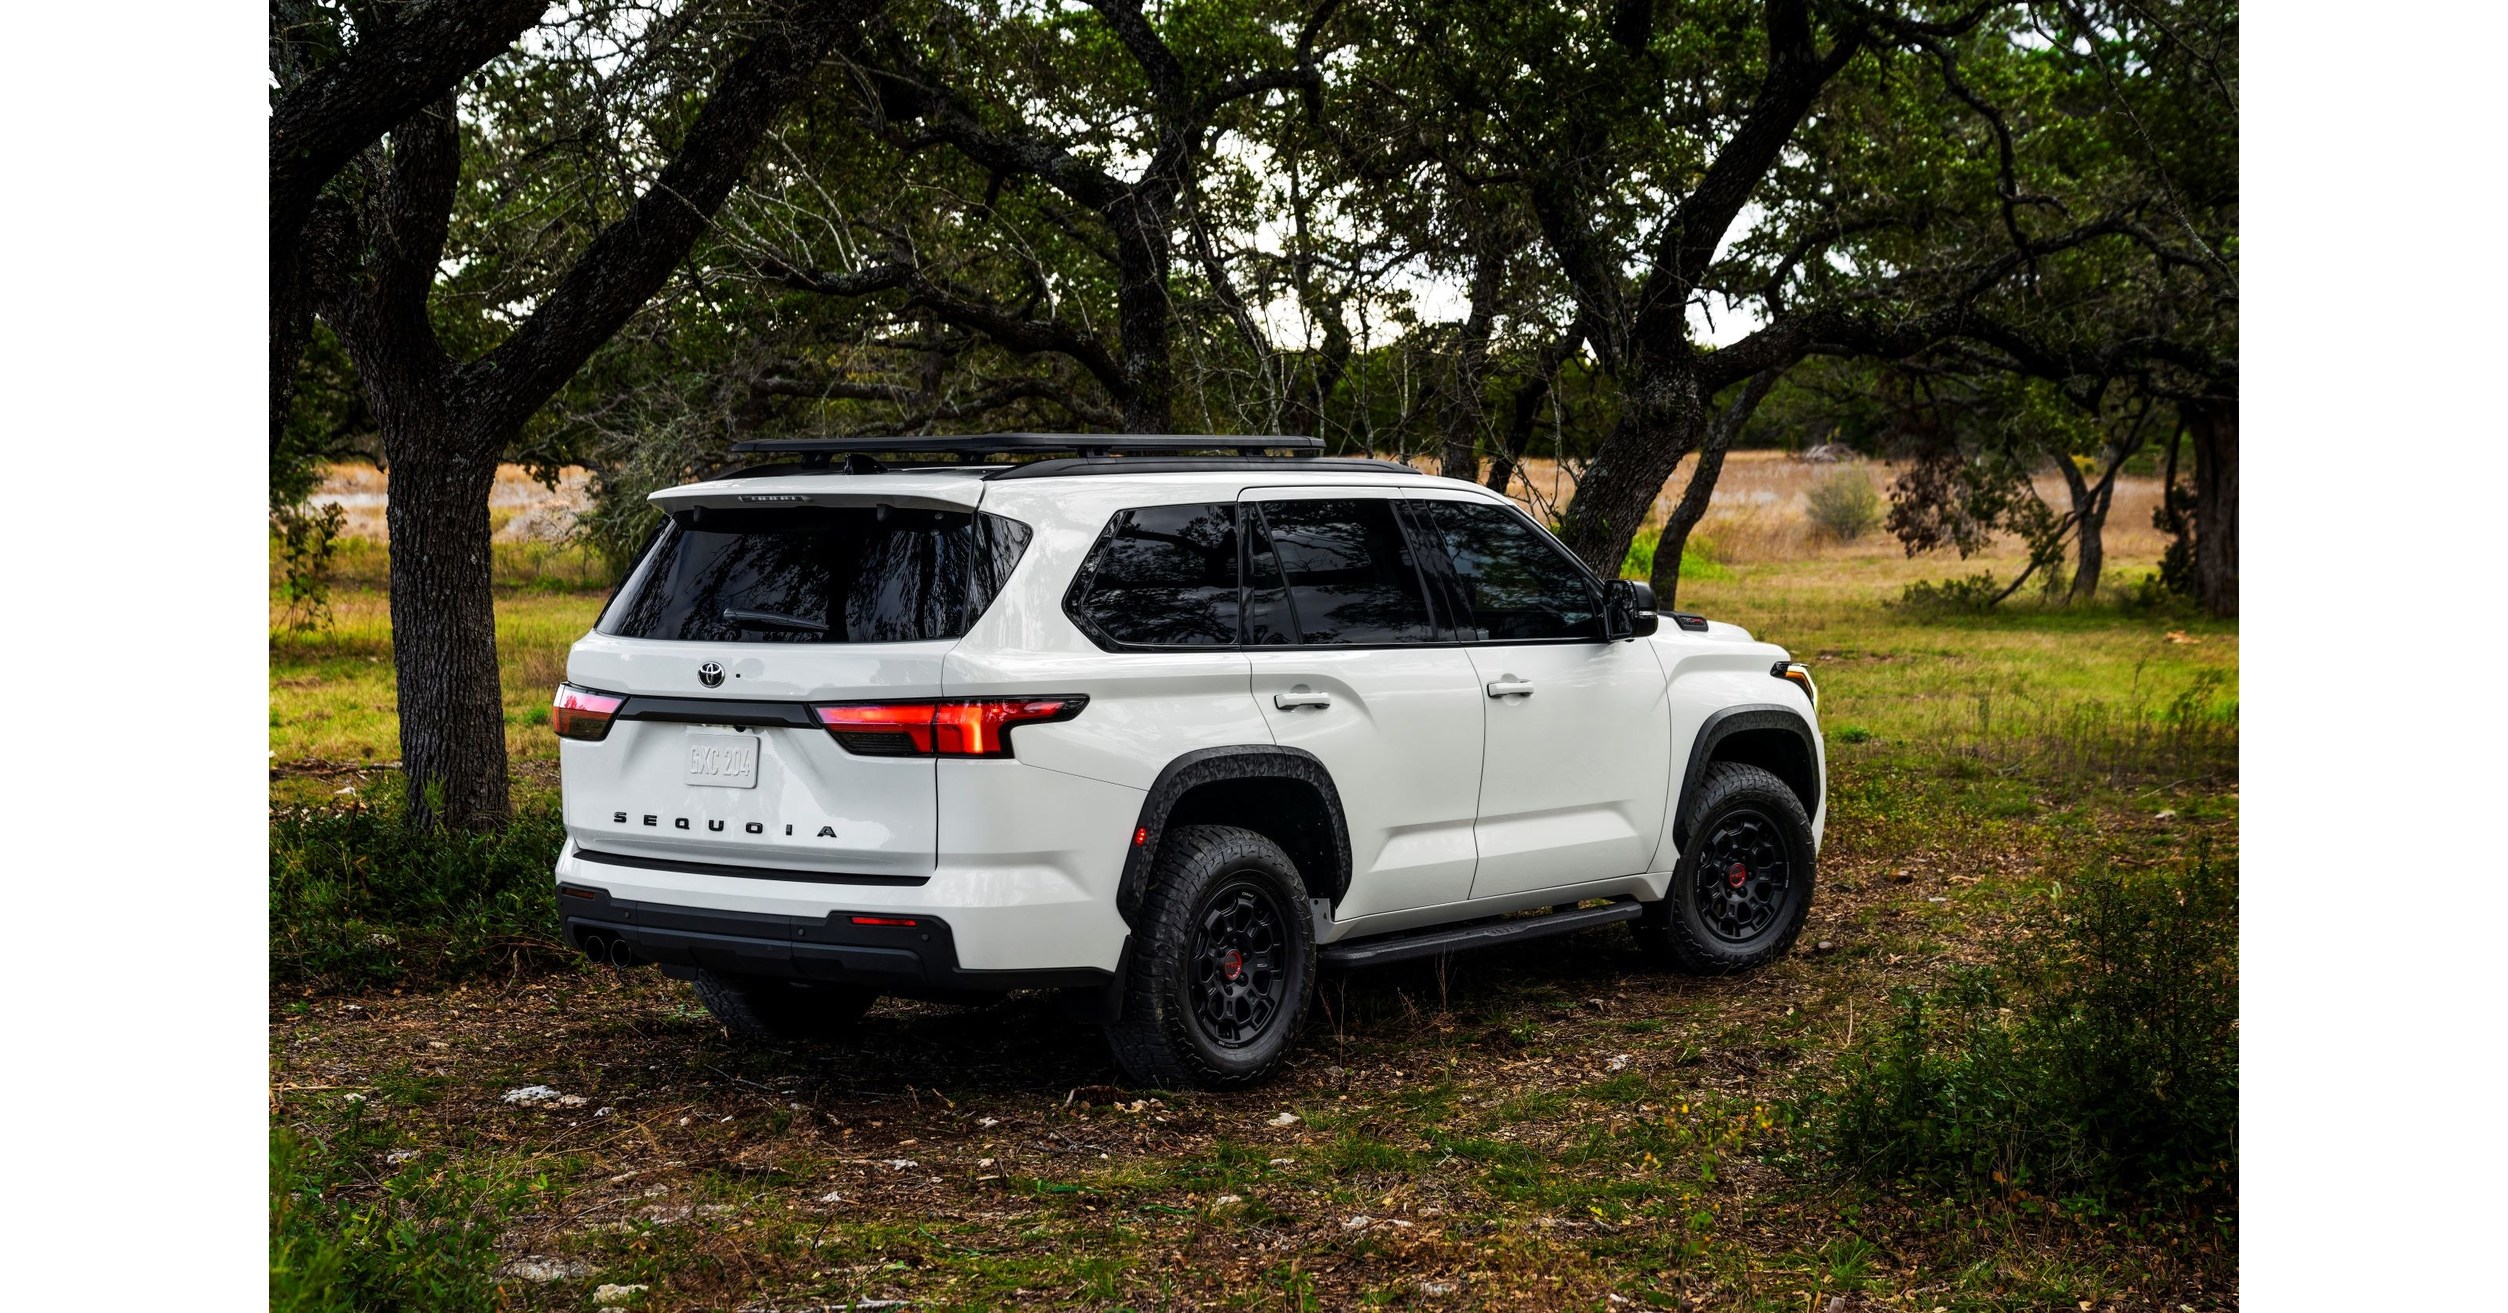 Standing Tall: All-New 2023 Sequoia Full-Size SUV is Ready to Make